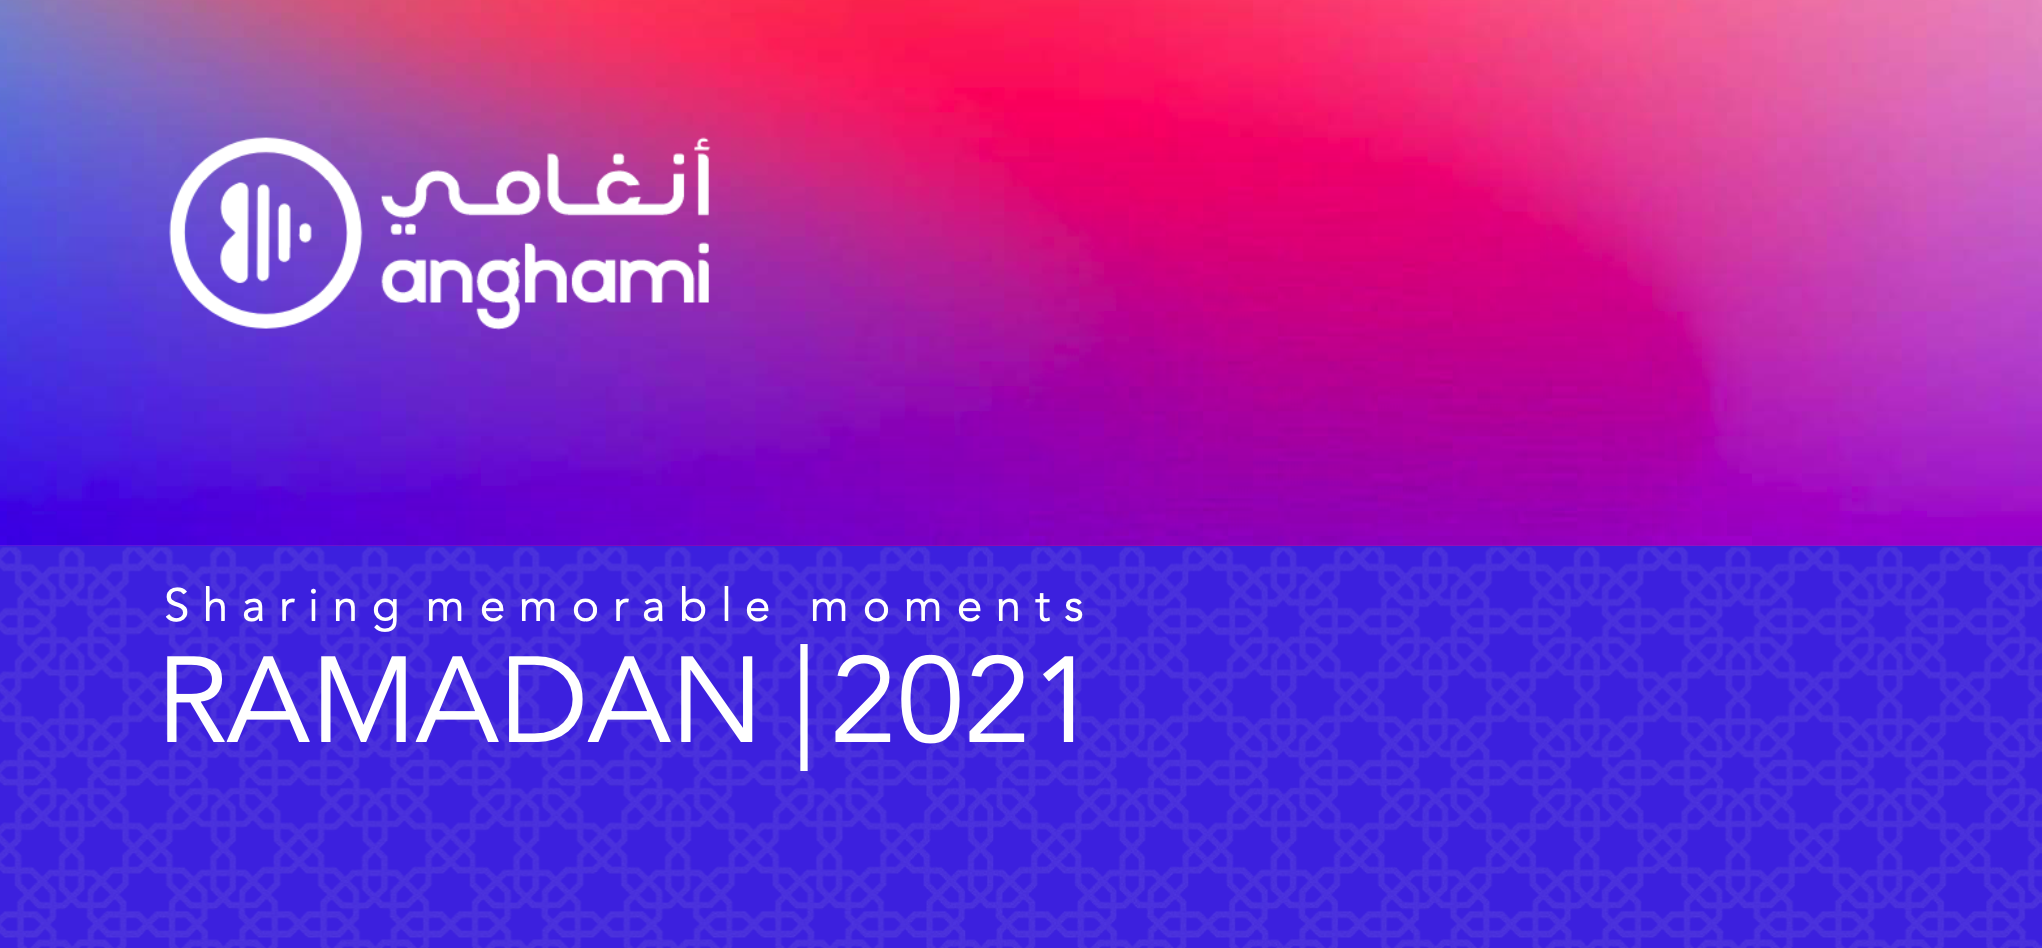 Anghami's New Report Helps Paint a Picture On What Ramadan 2021 Will Look Like